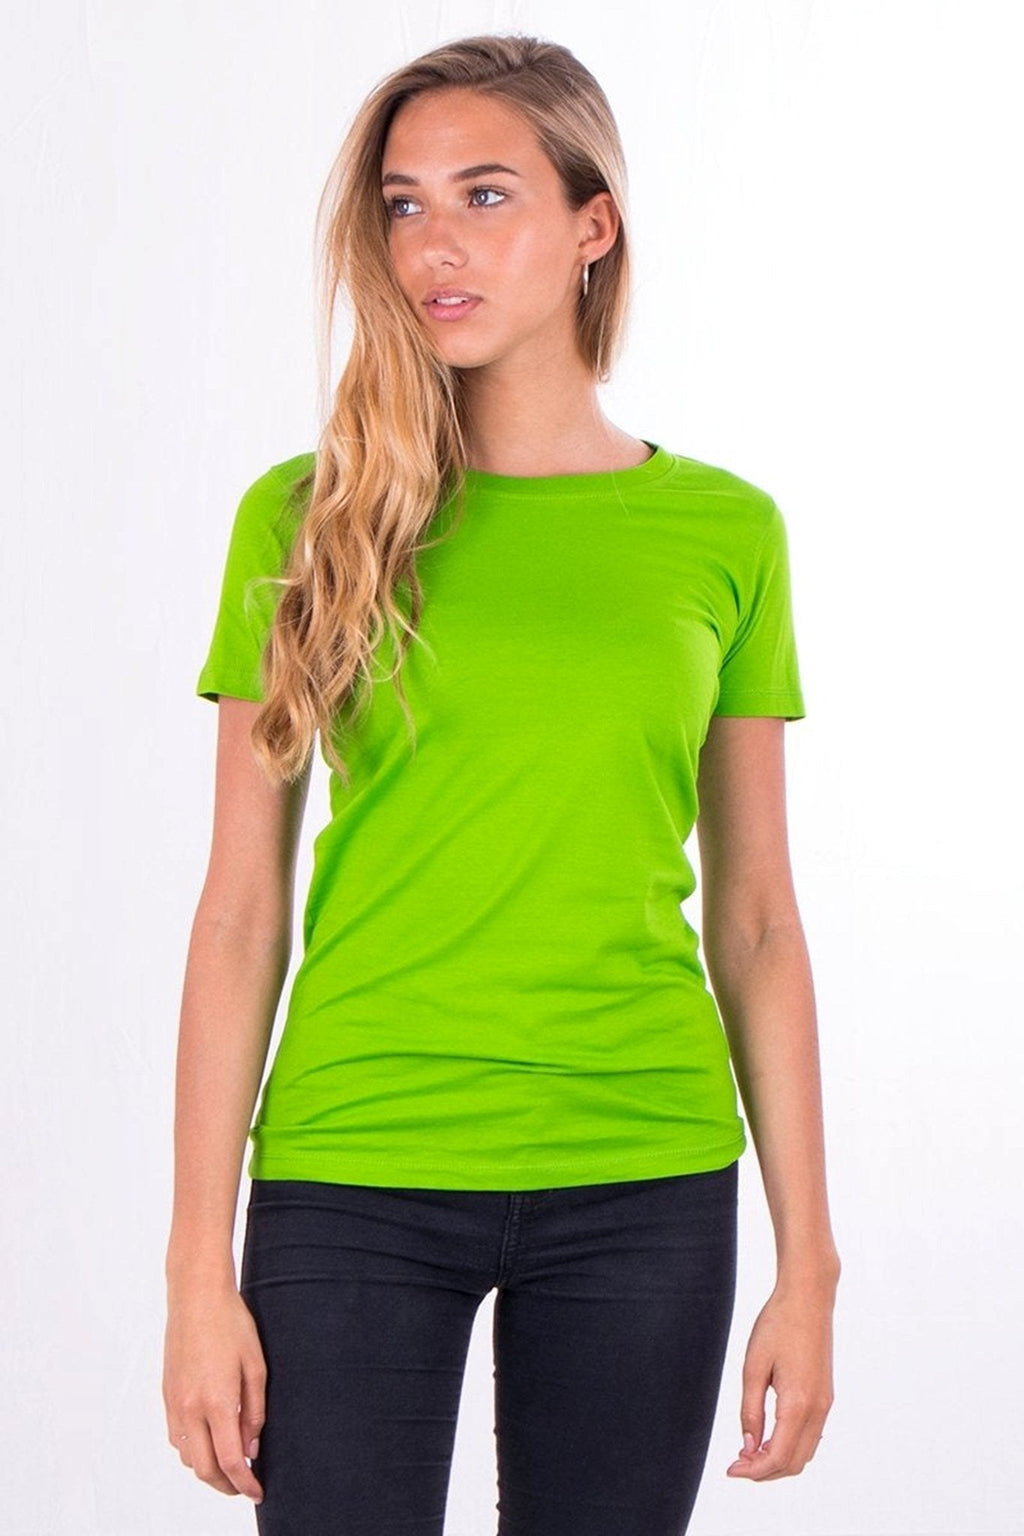 Fitted t-shirt - Lime green